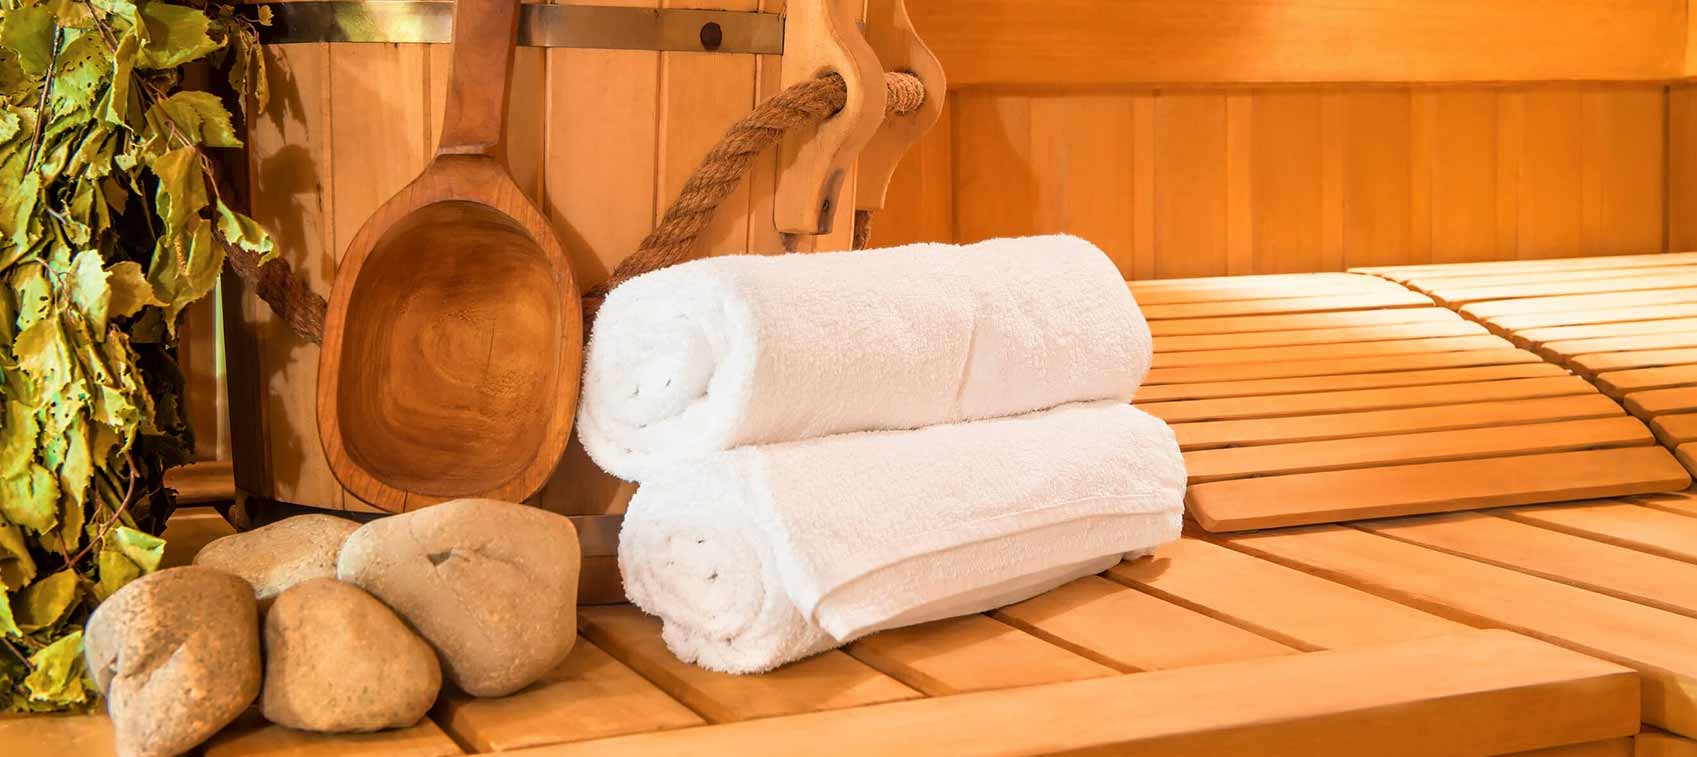 5 Reasons To Have A Home Sauna